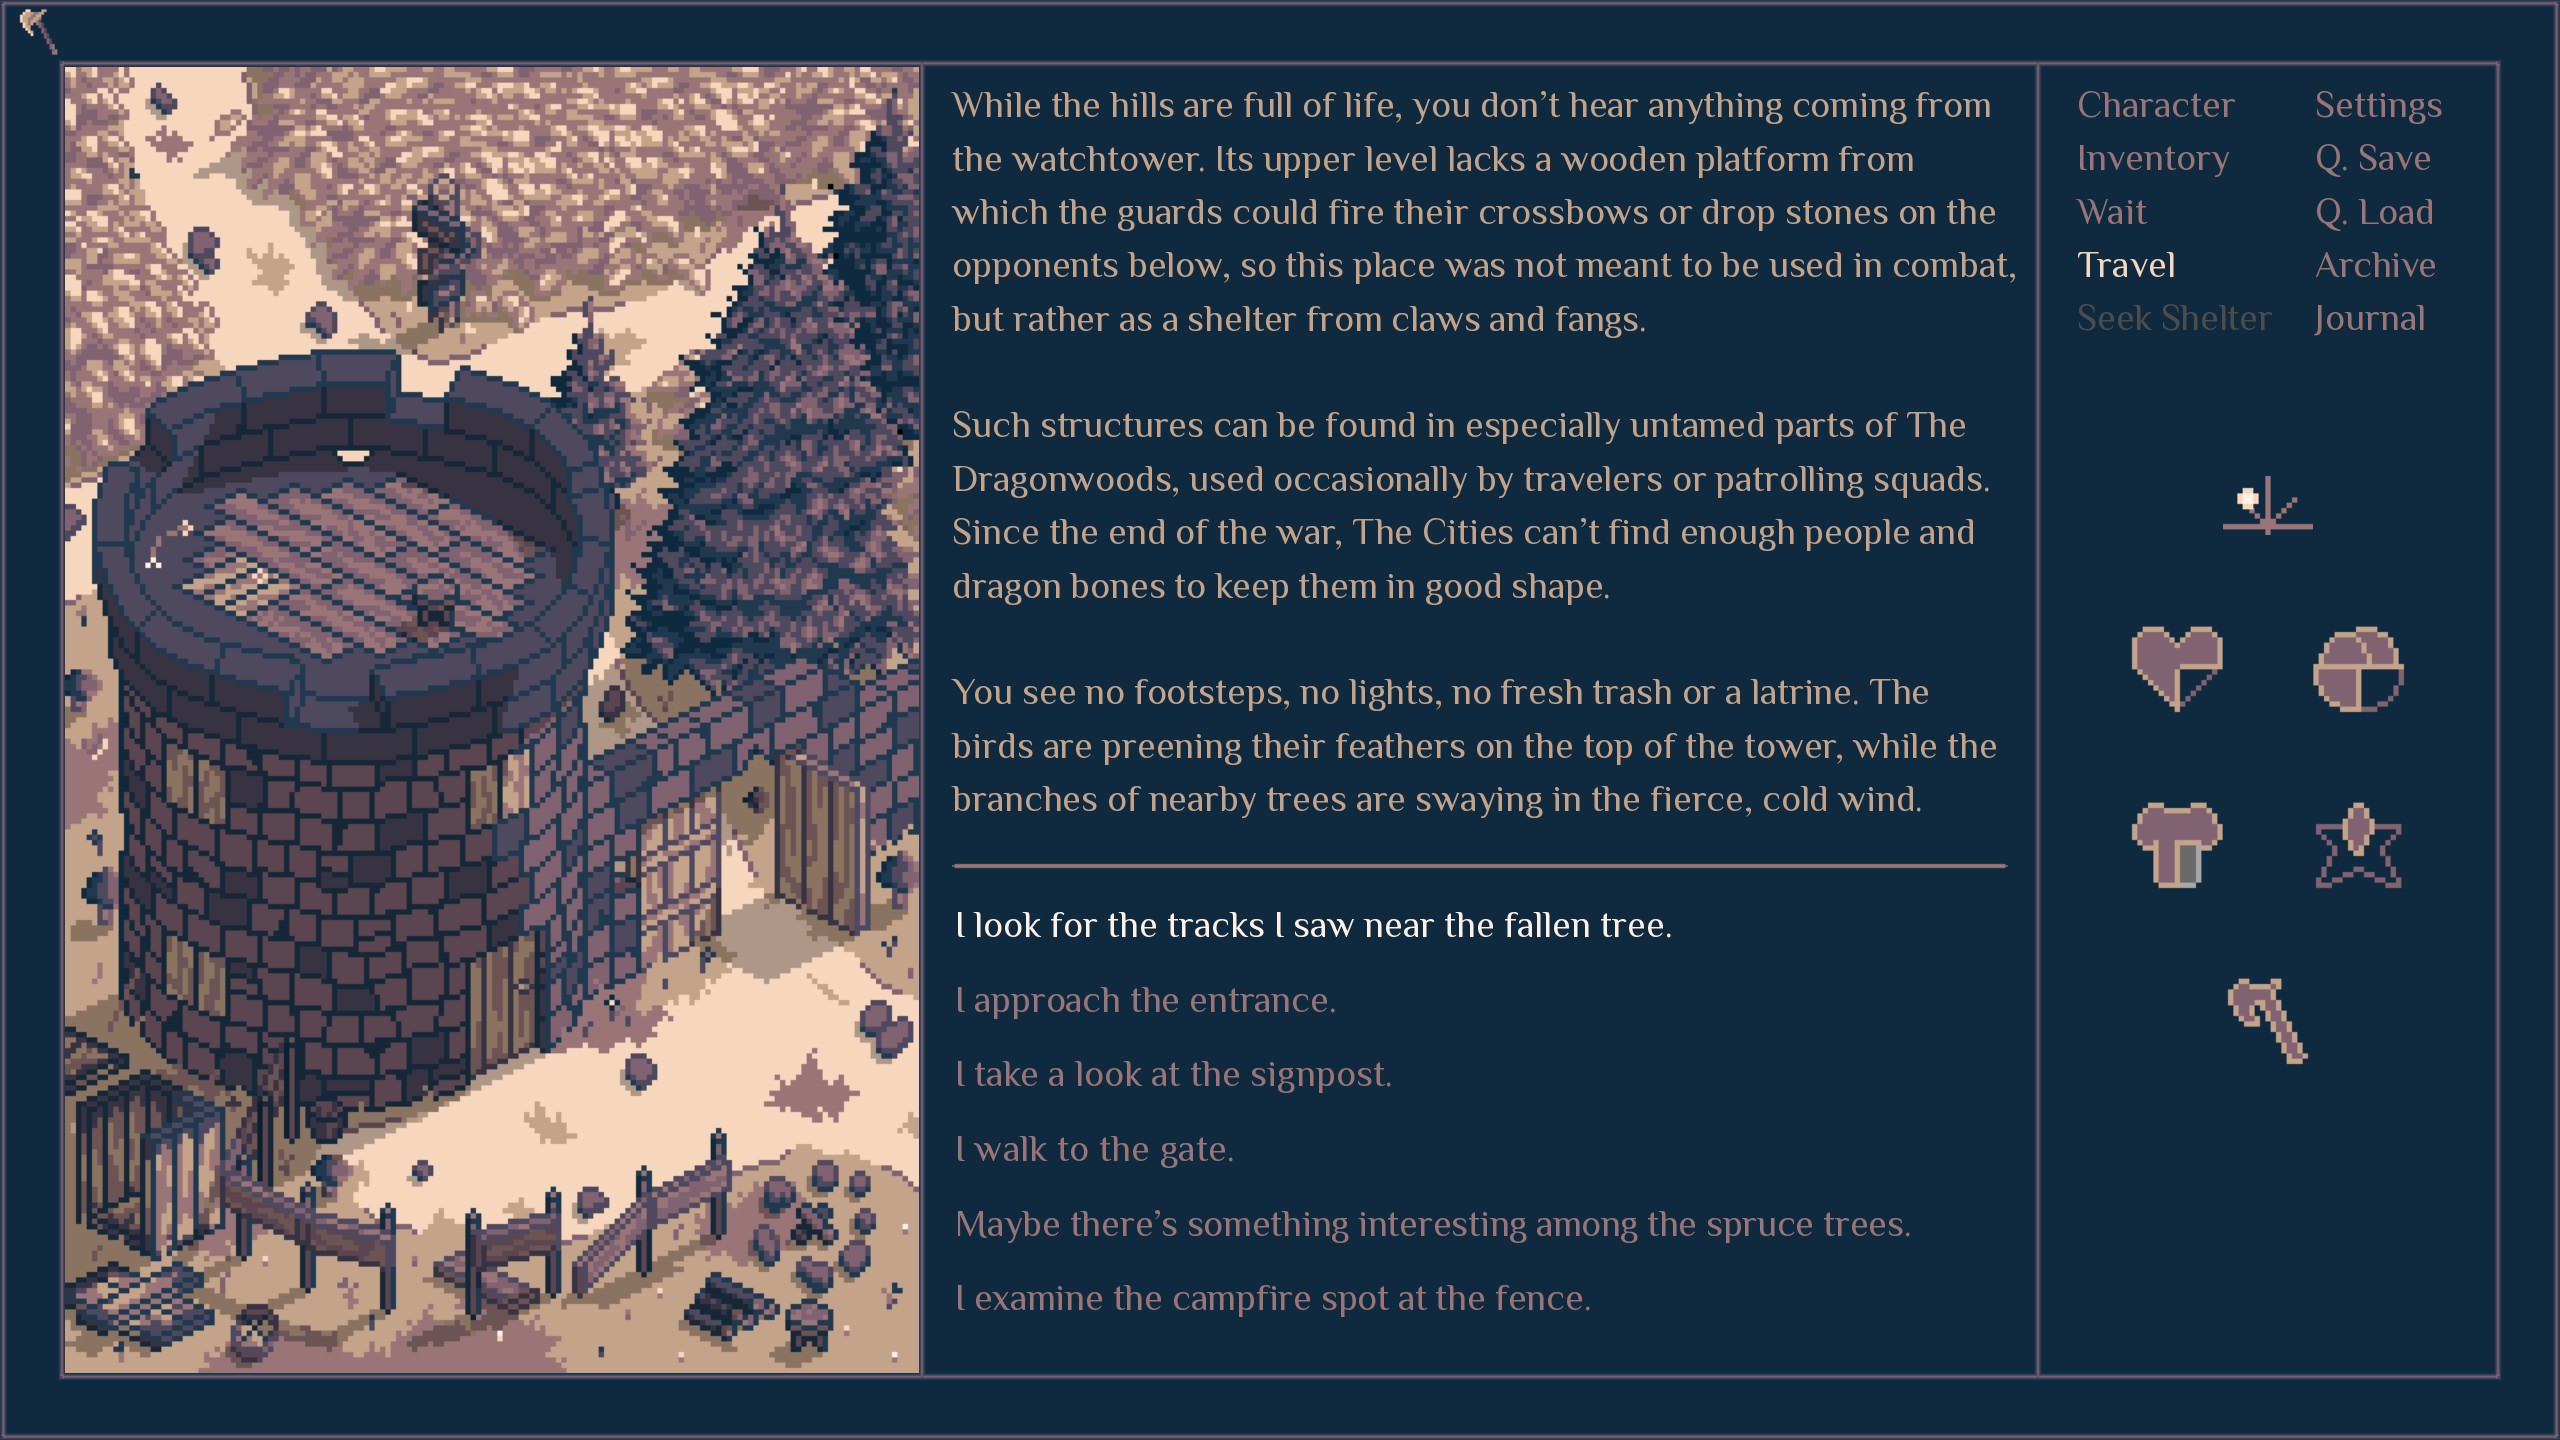 Roadwarden - An illustration of a stone tower with a description of the scene and different options with players stats in the right sidebar.